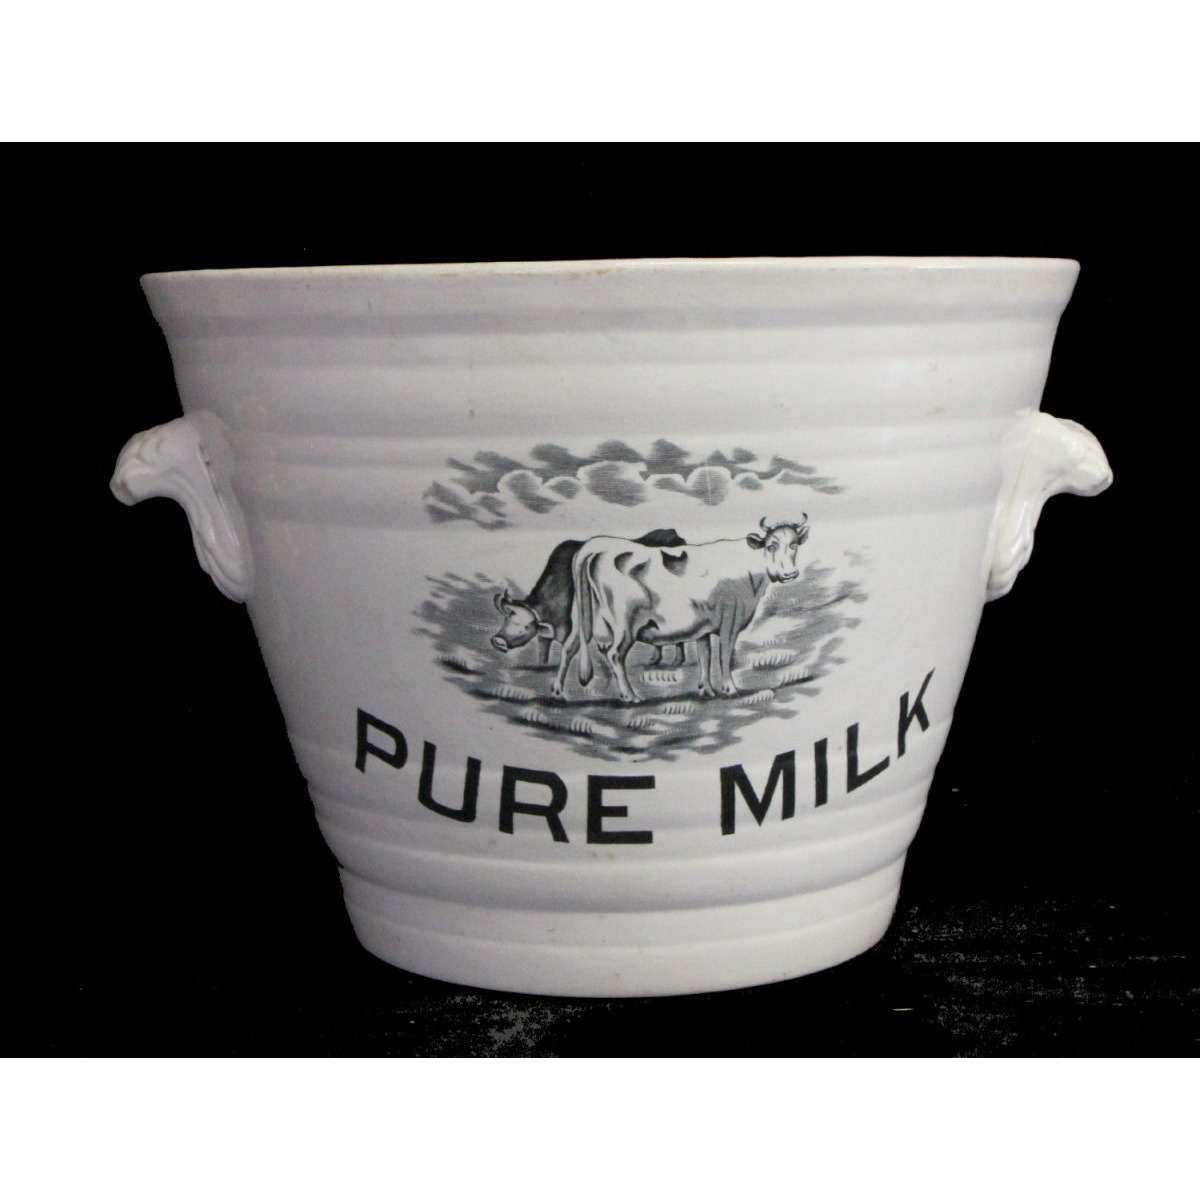 Outstanding Ironstone Pure Milk Pail with Black Cow Transfer